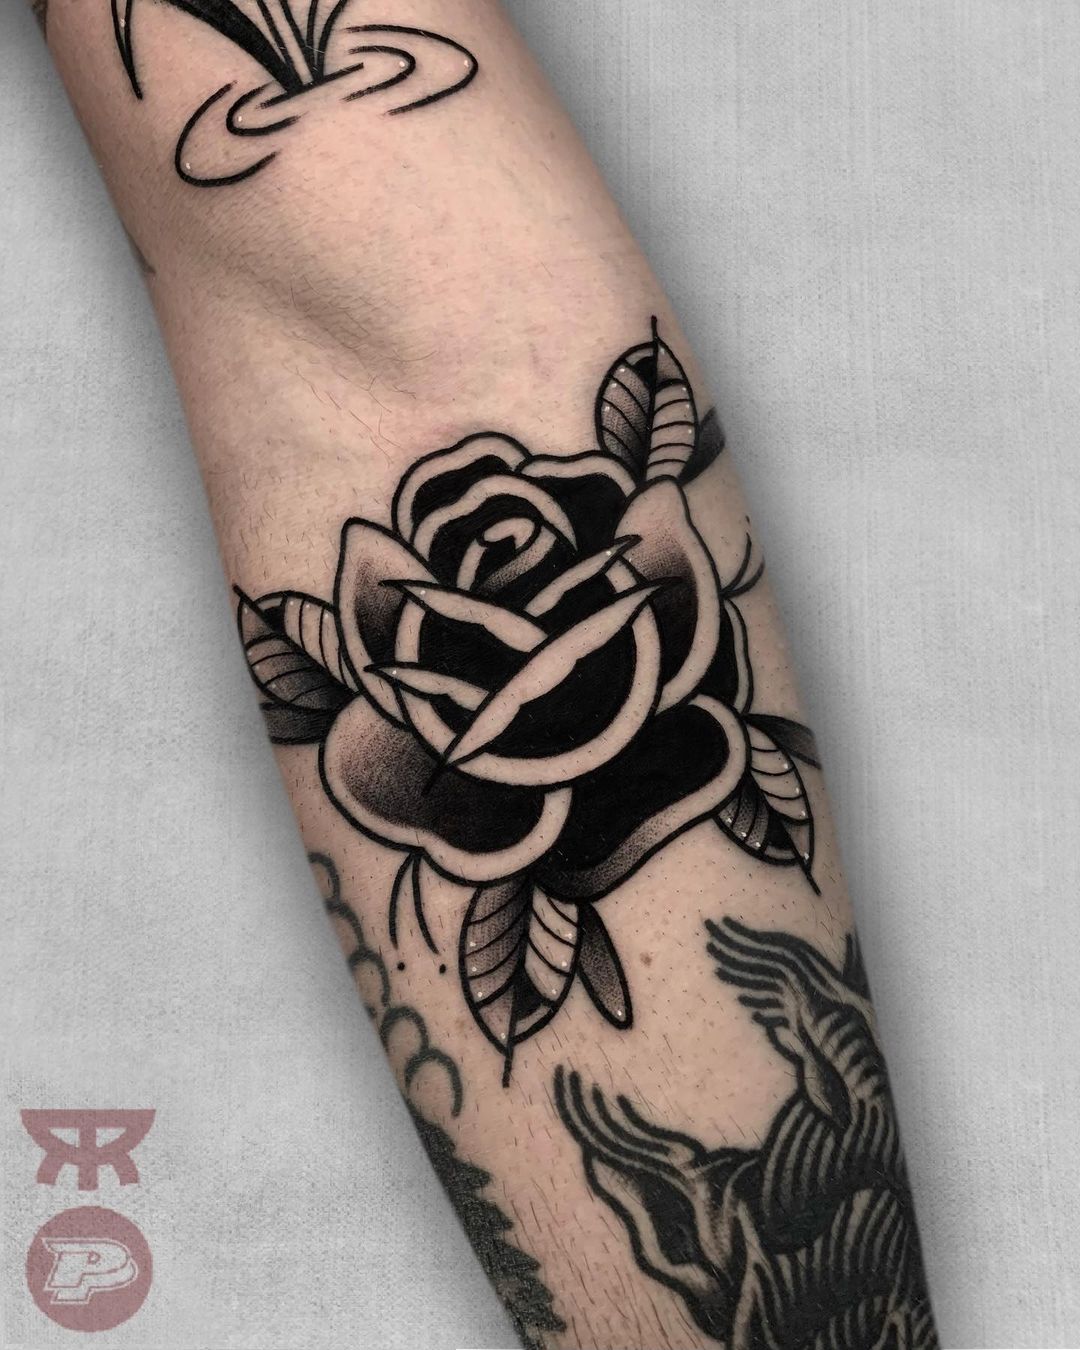 Traditional rose tattoo by crayola.tattoo